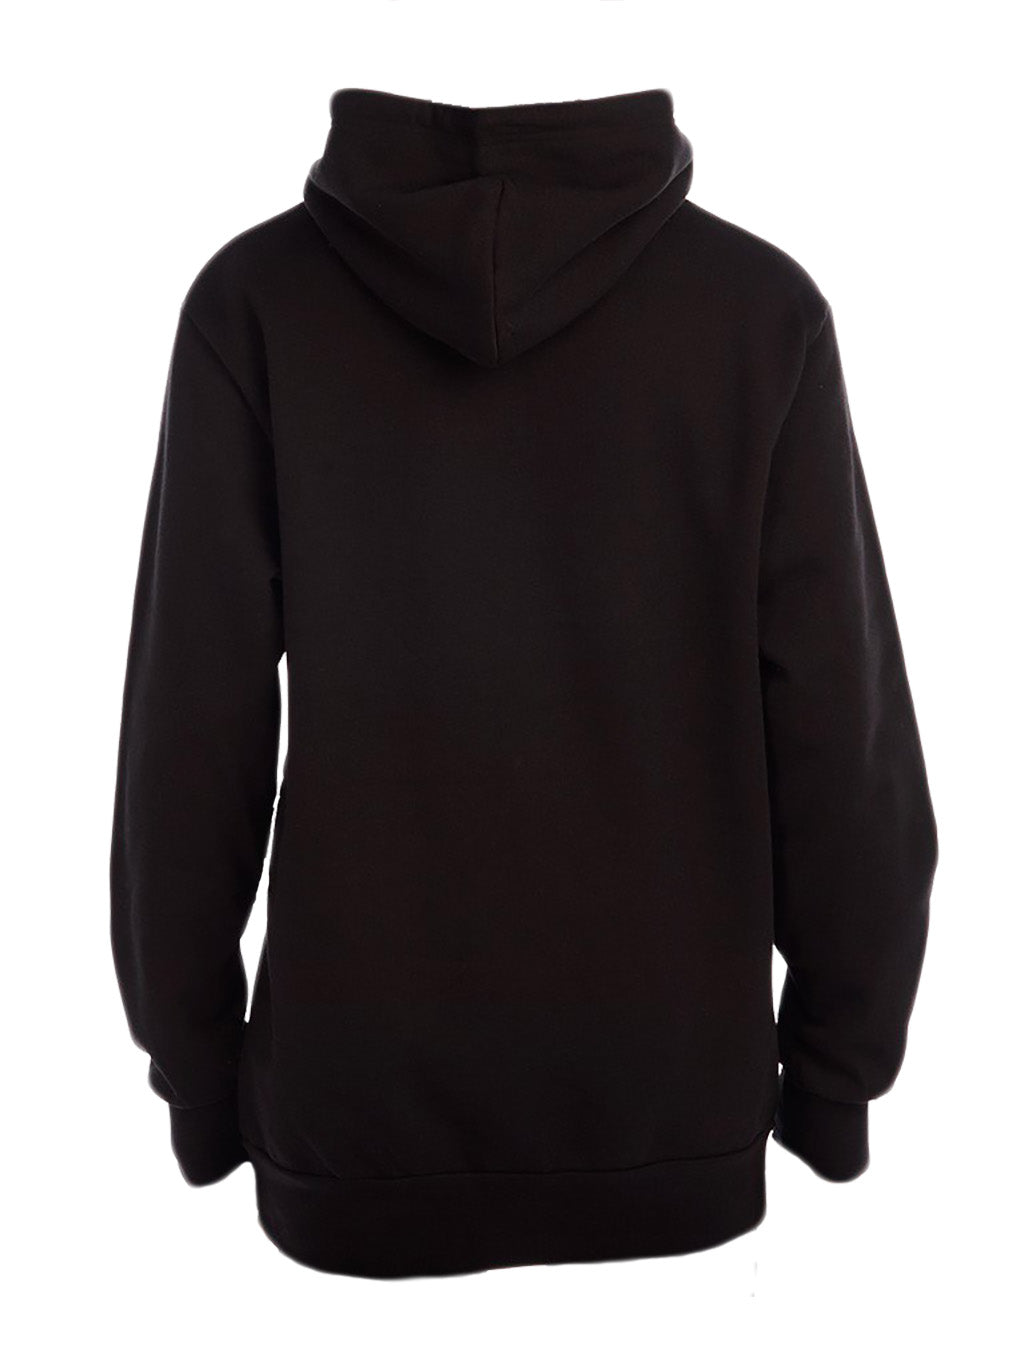 Not a Monday Person - Hoodie - BuyAbility South Africa